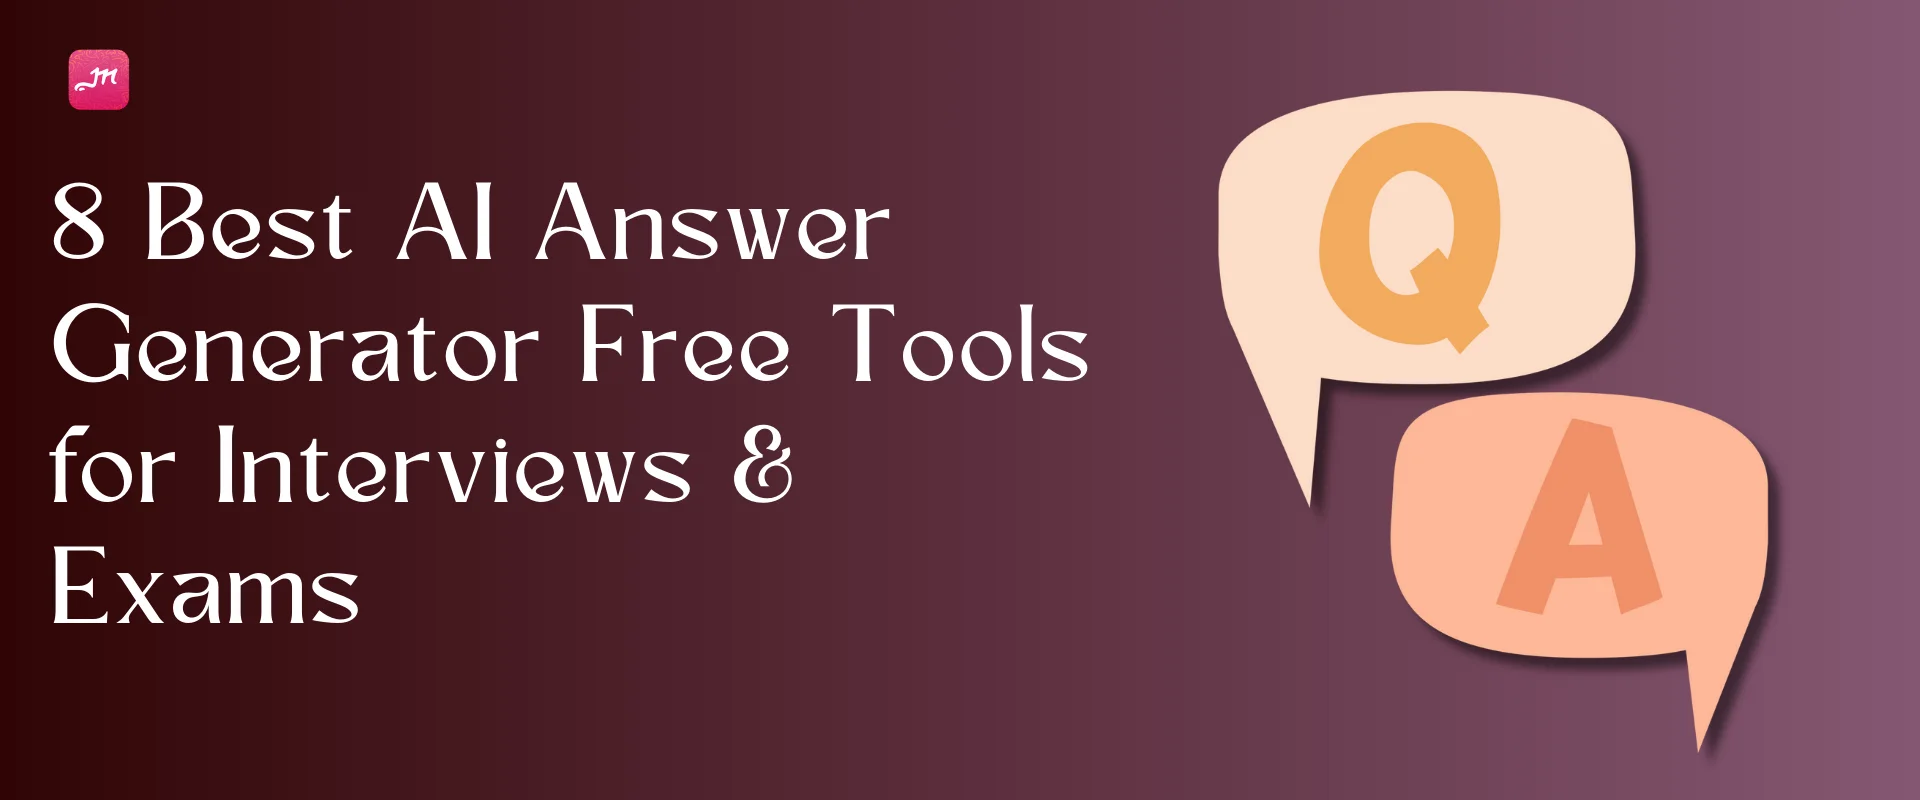 8 Best AI Answer Generator Free Tools for Interviews & Exams